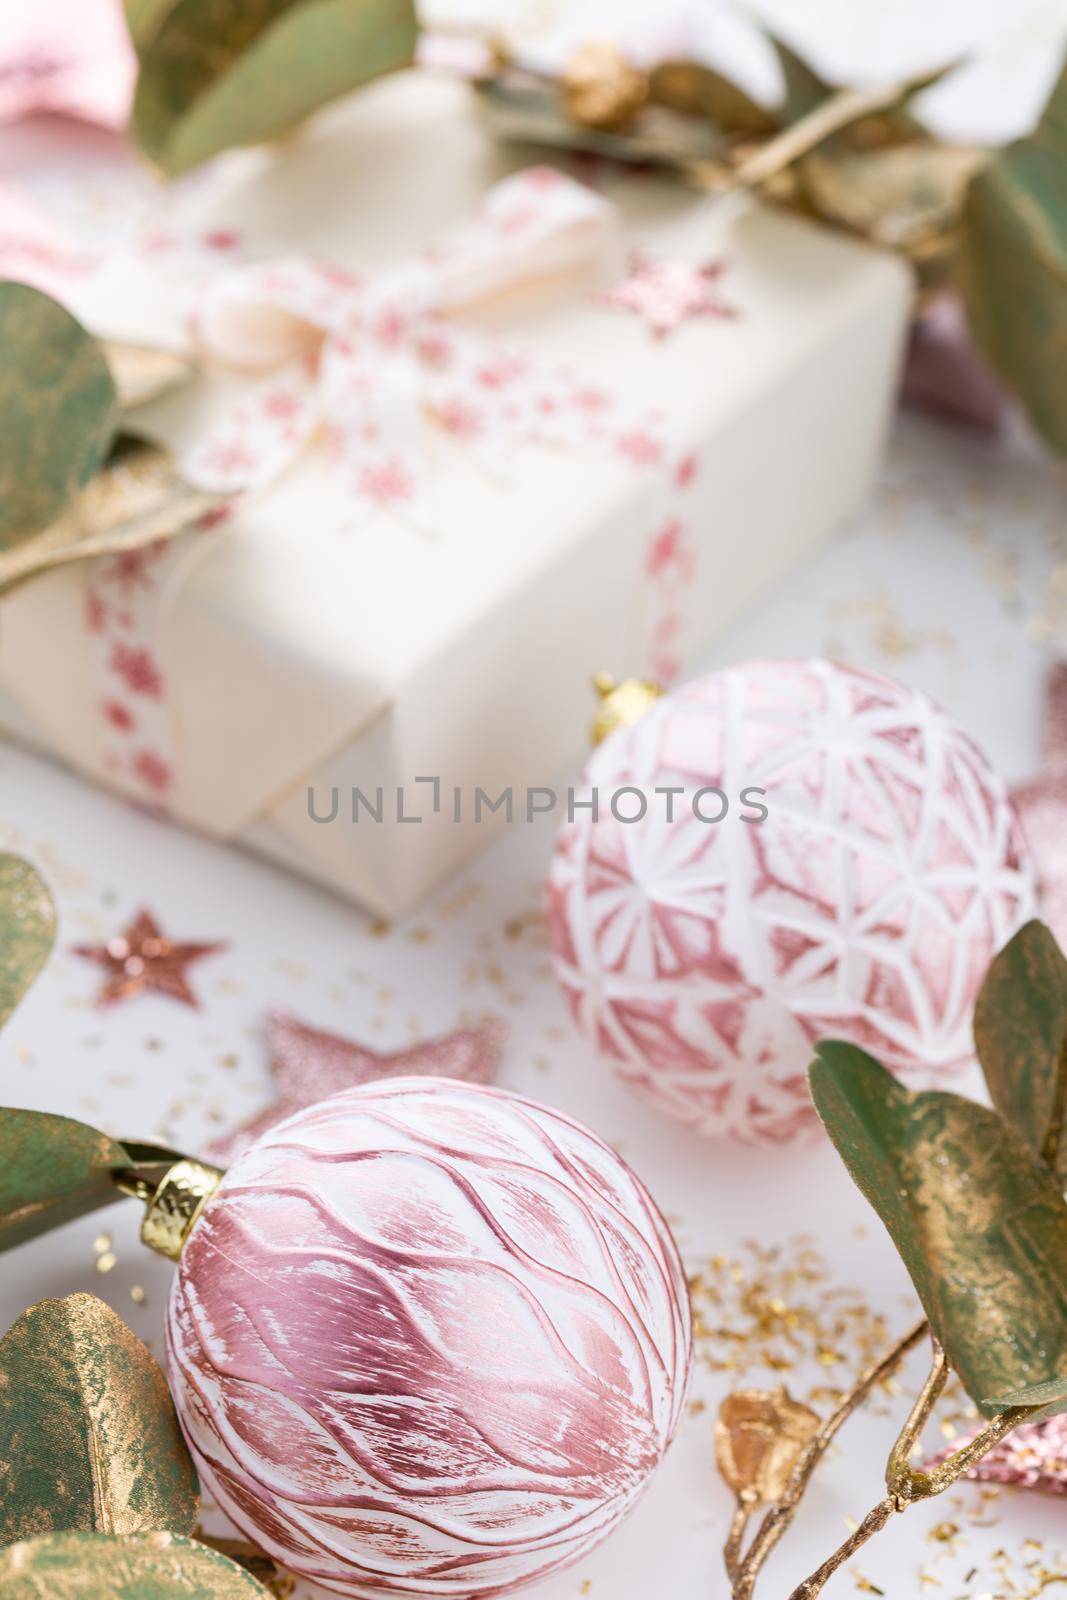 Christmas composition. Decorations on white background. Christmas, winter, new year concept. Flat lay, top view, copy space